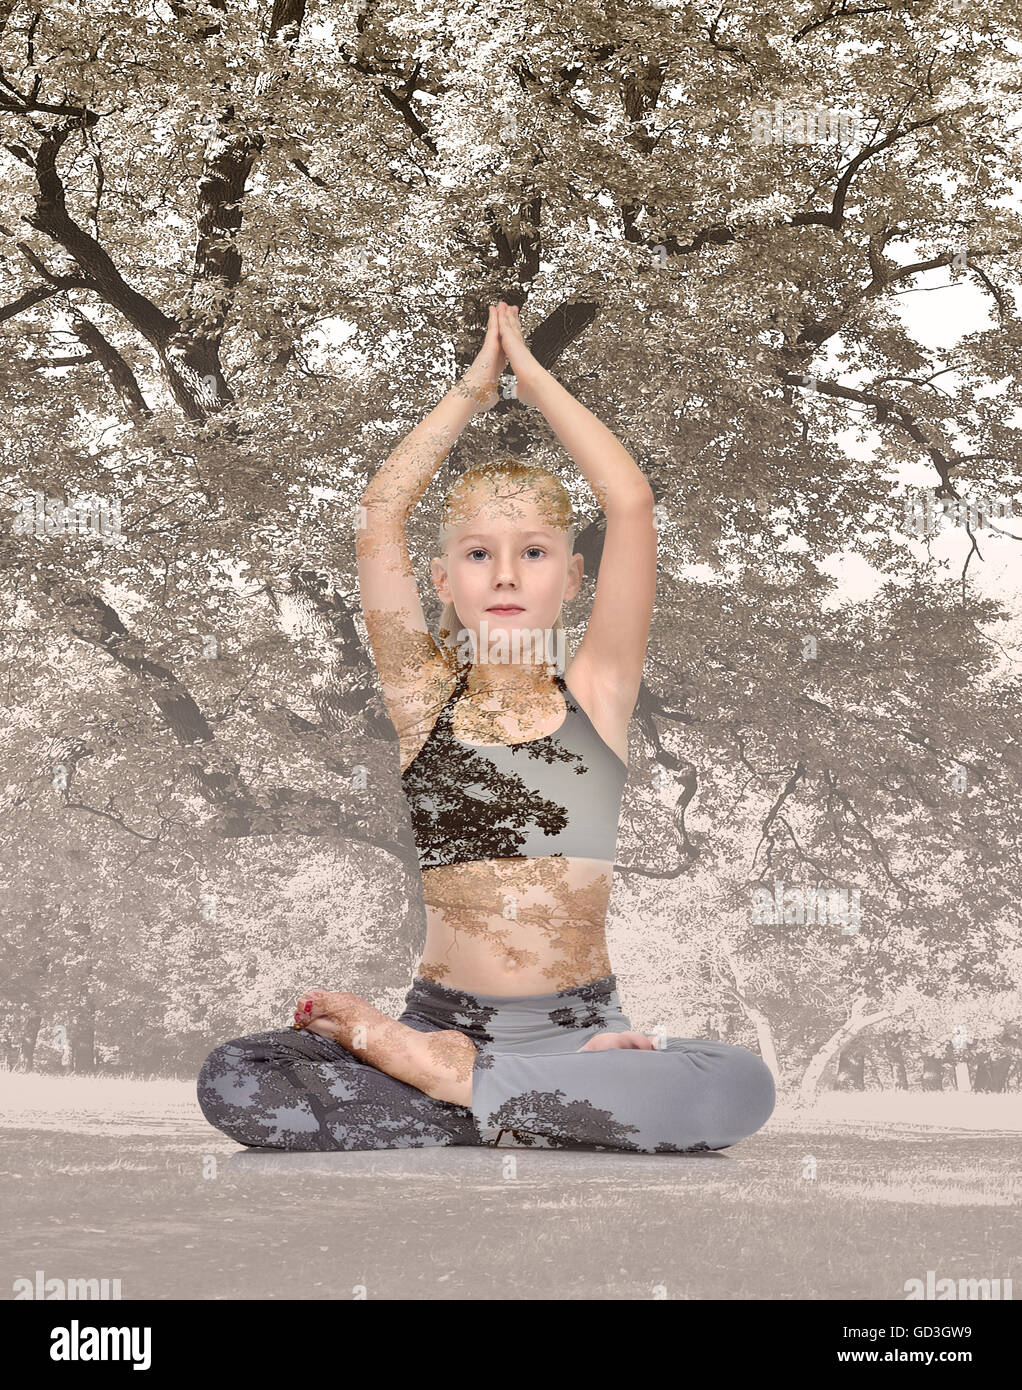 Group of Diverse Young Girls Practicing Meditation, Sitting on Yoga Mats in  Lotus Pose Outdoors, Copy Space Stock Image - Image of body, breathing:  192678535